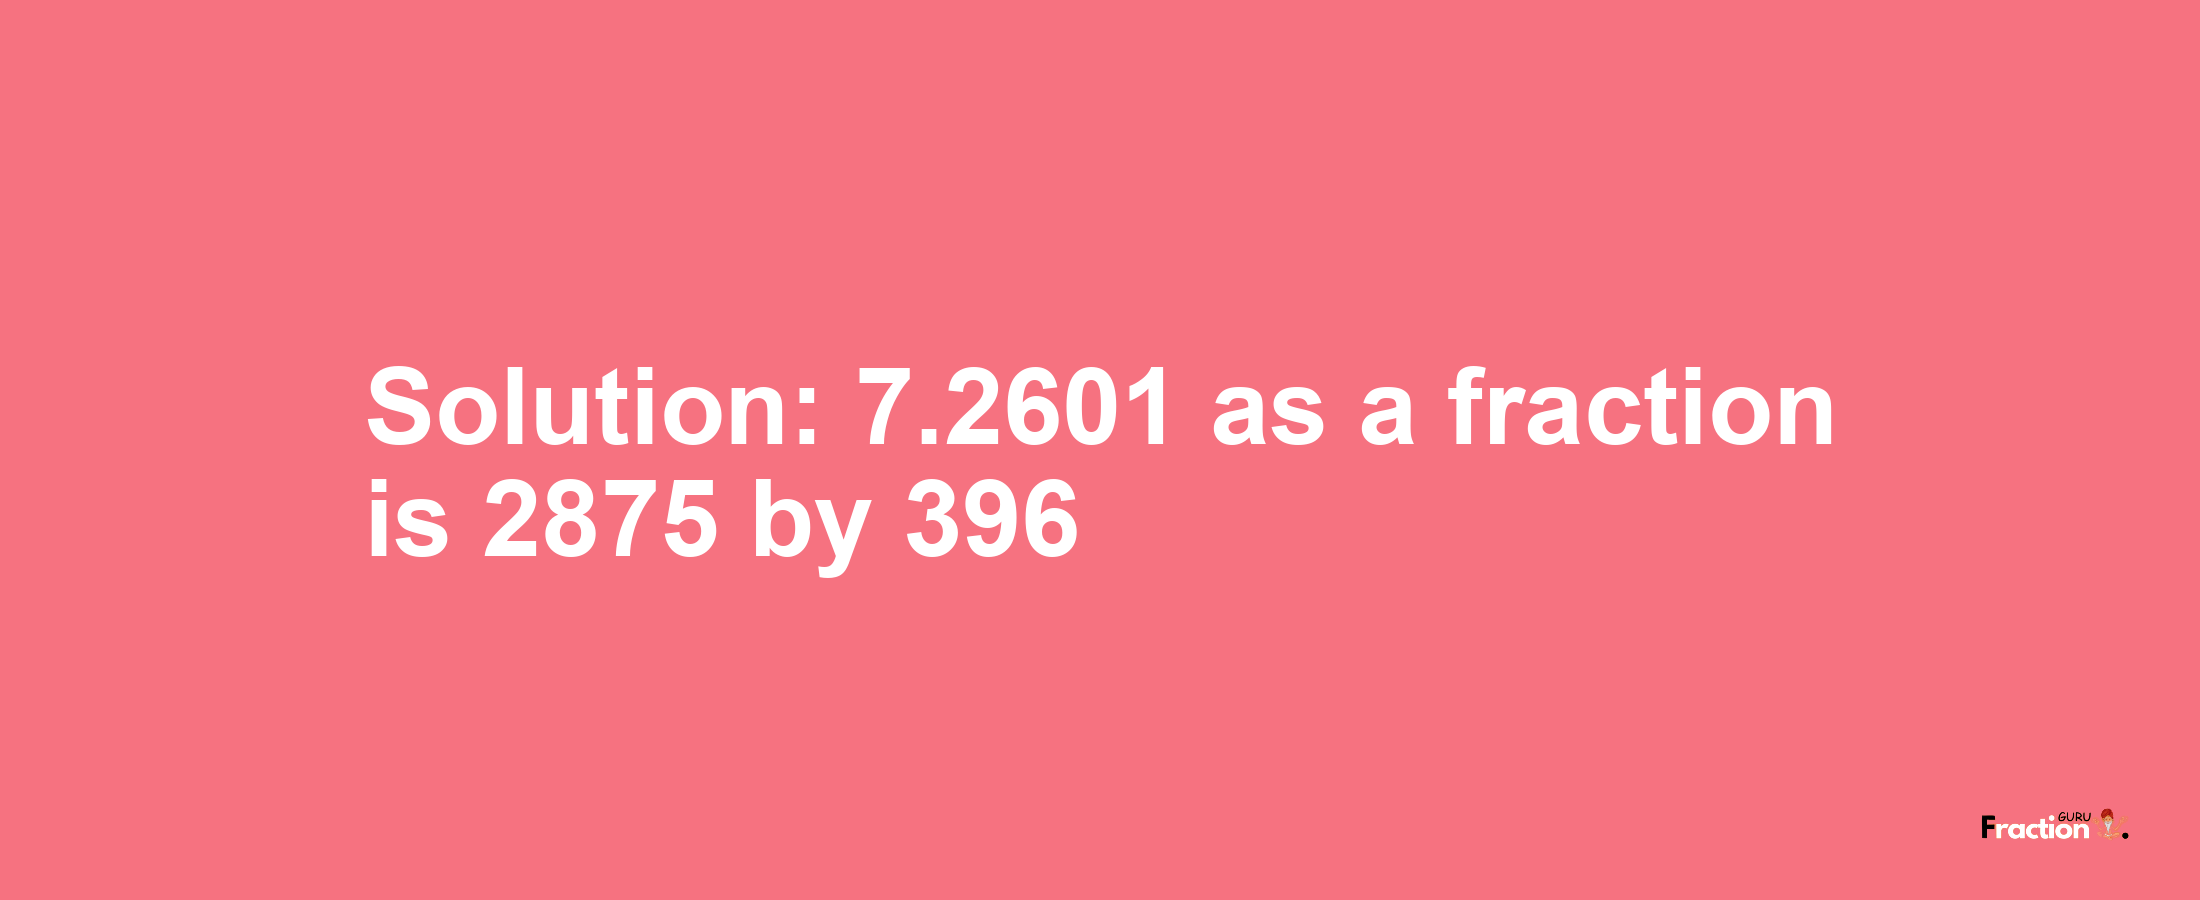 Solution:7.2601 as a fraction is 2875/396